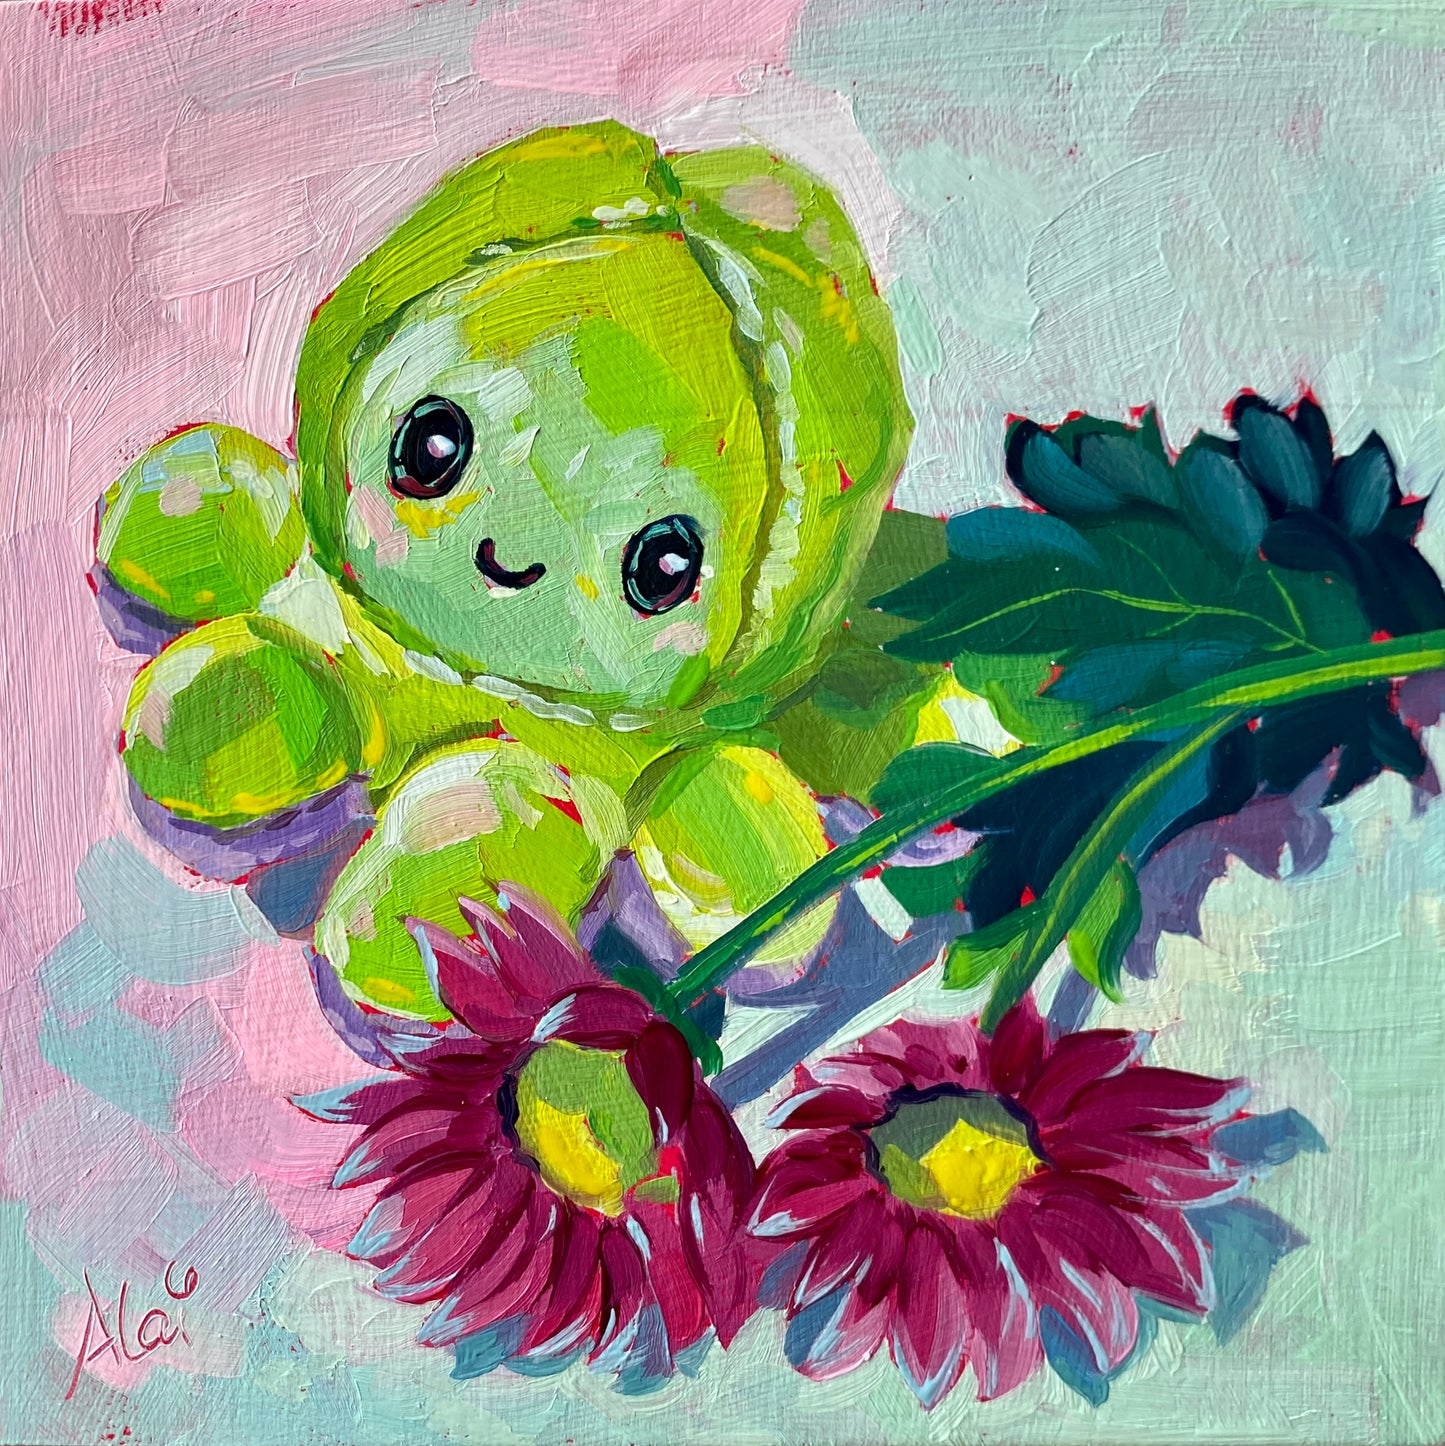 Octoplushie's gift - Original Oil Painting